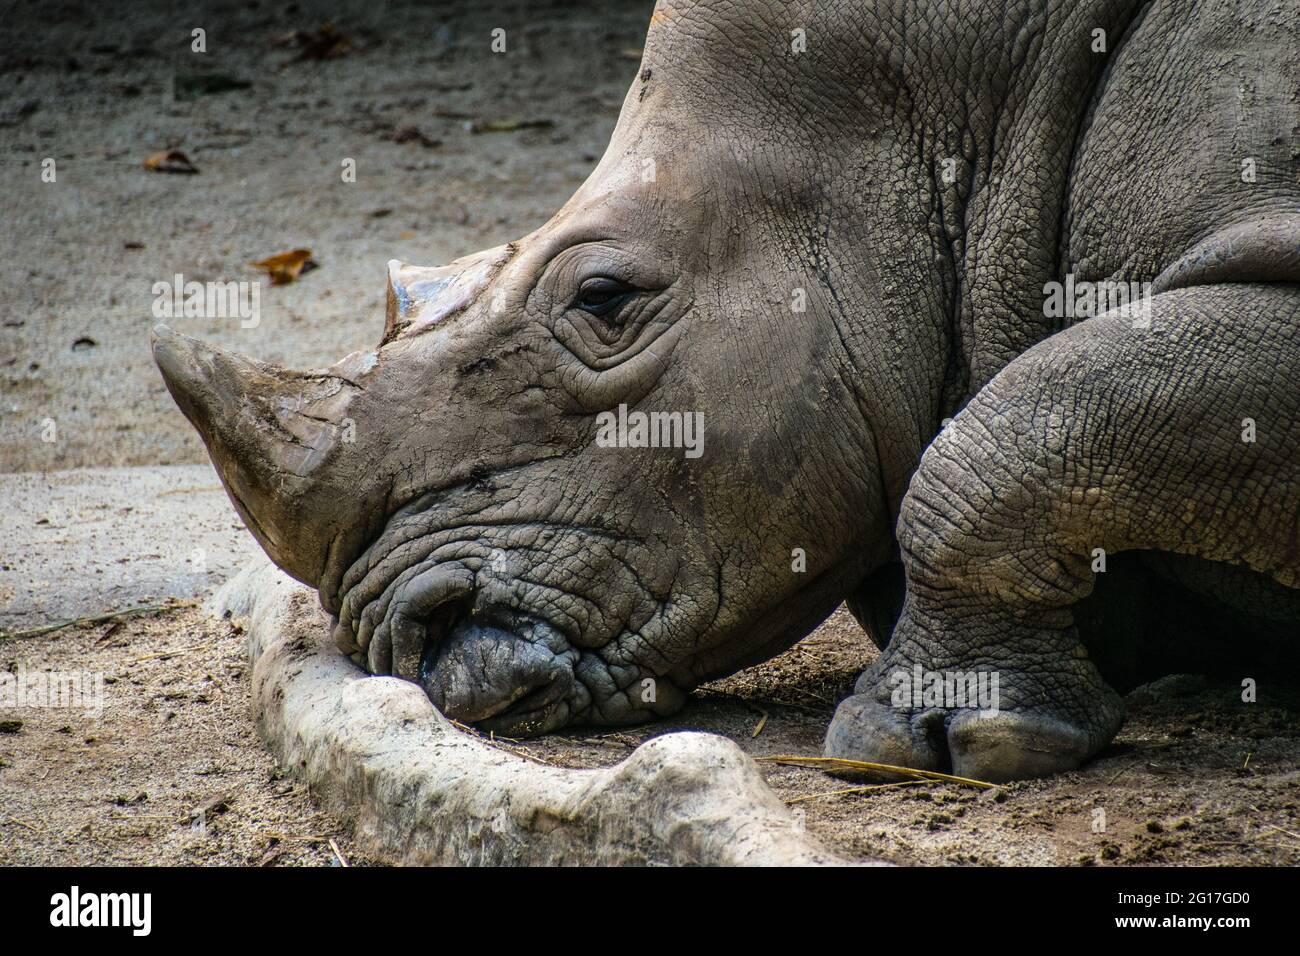 A rhinoceros, commonly abbreviated to rhino, is a member of any of the five extant species of odd-toed ungulates in the family Rhinocerotidae. Stock Photo